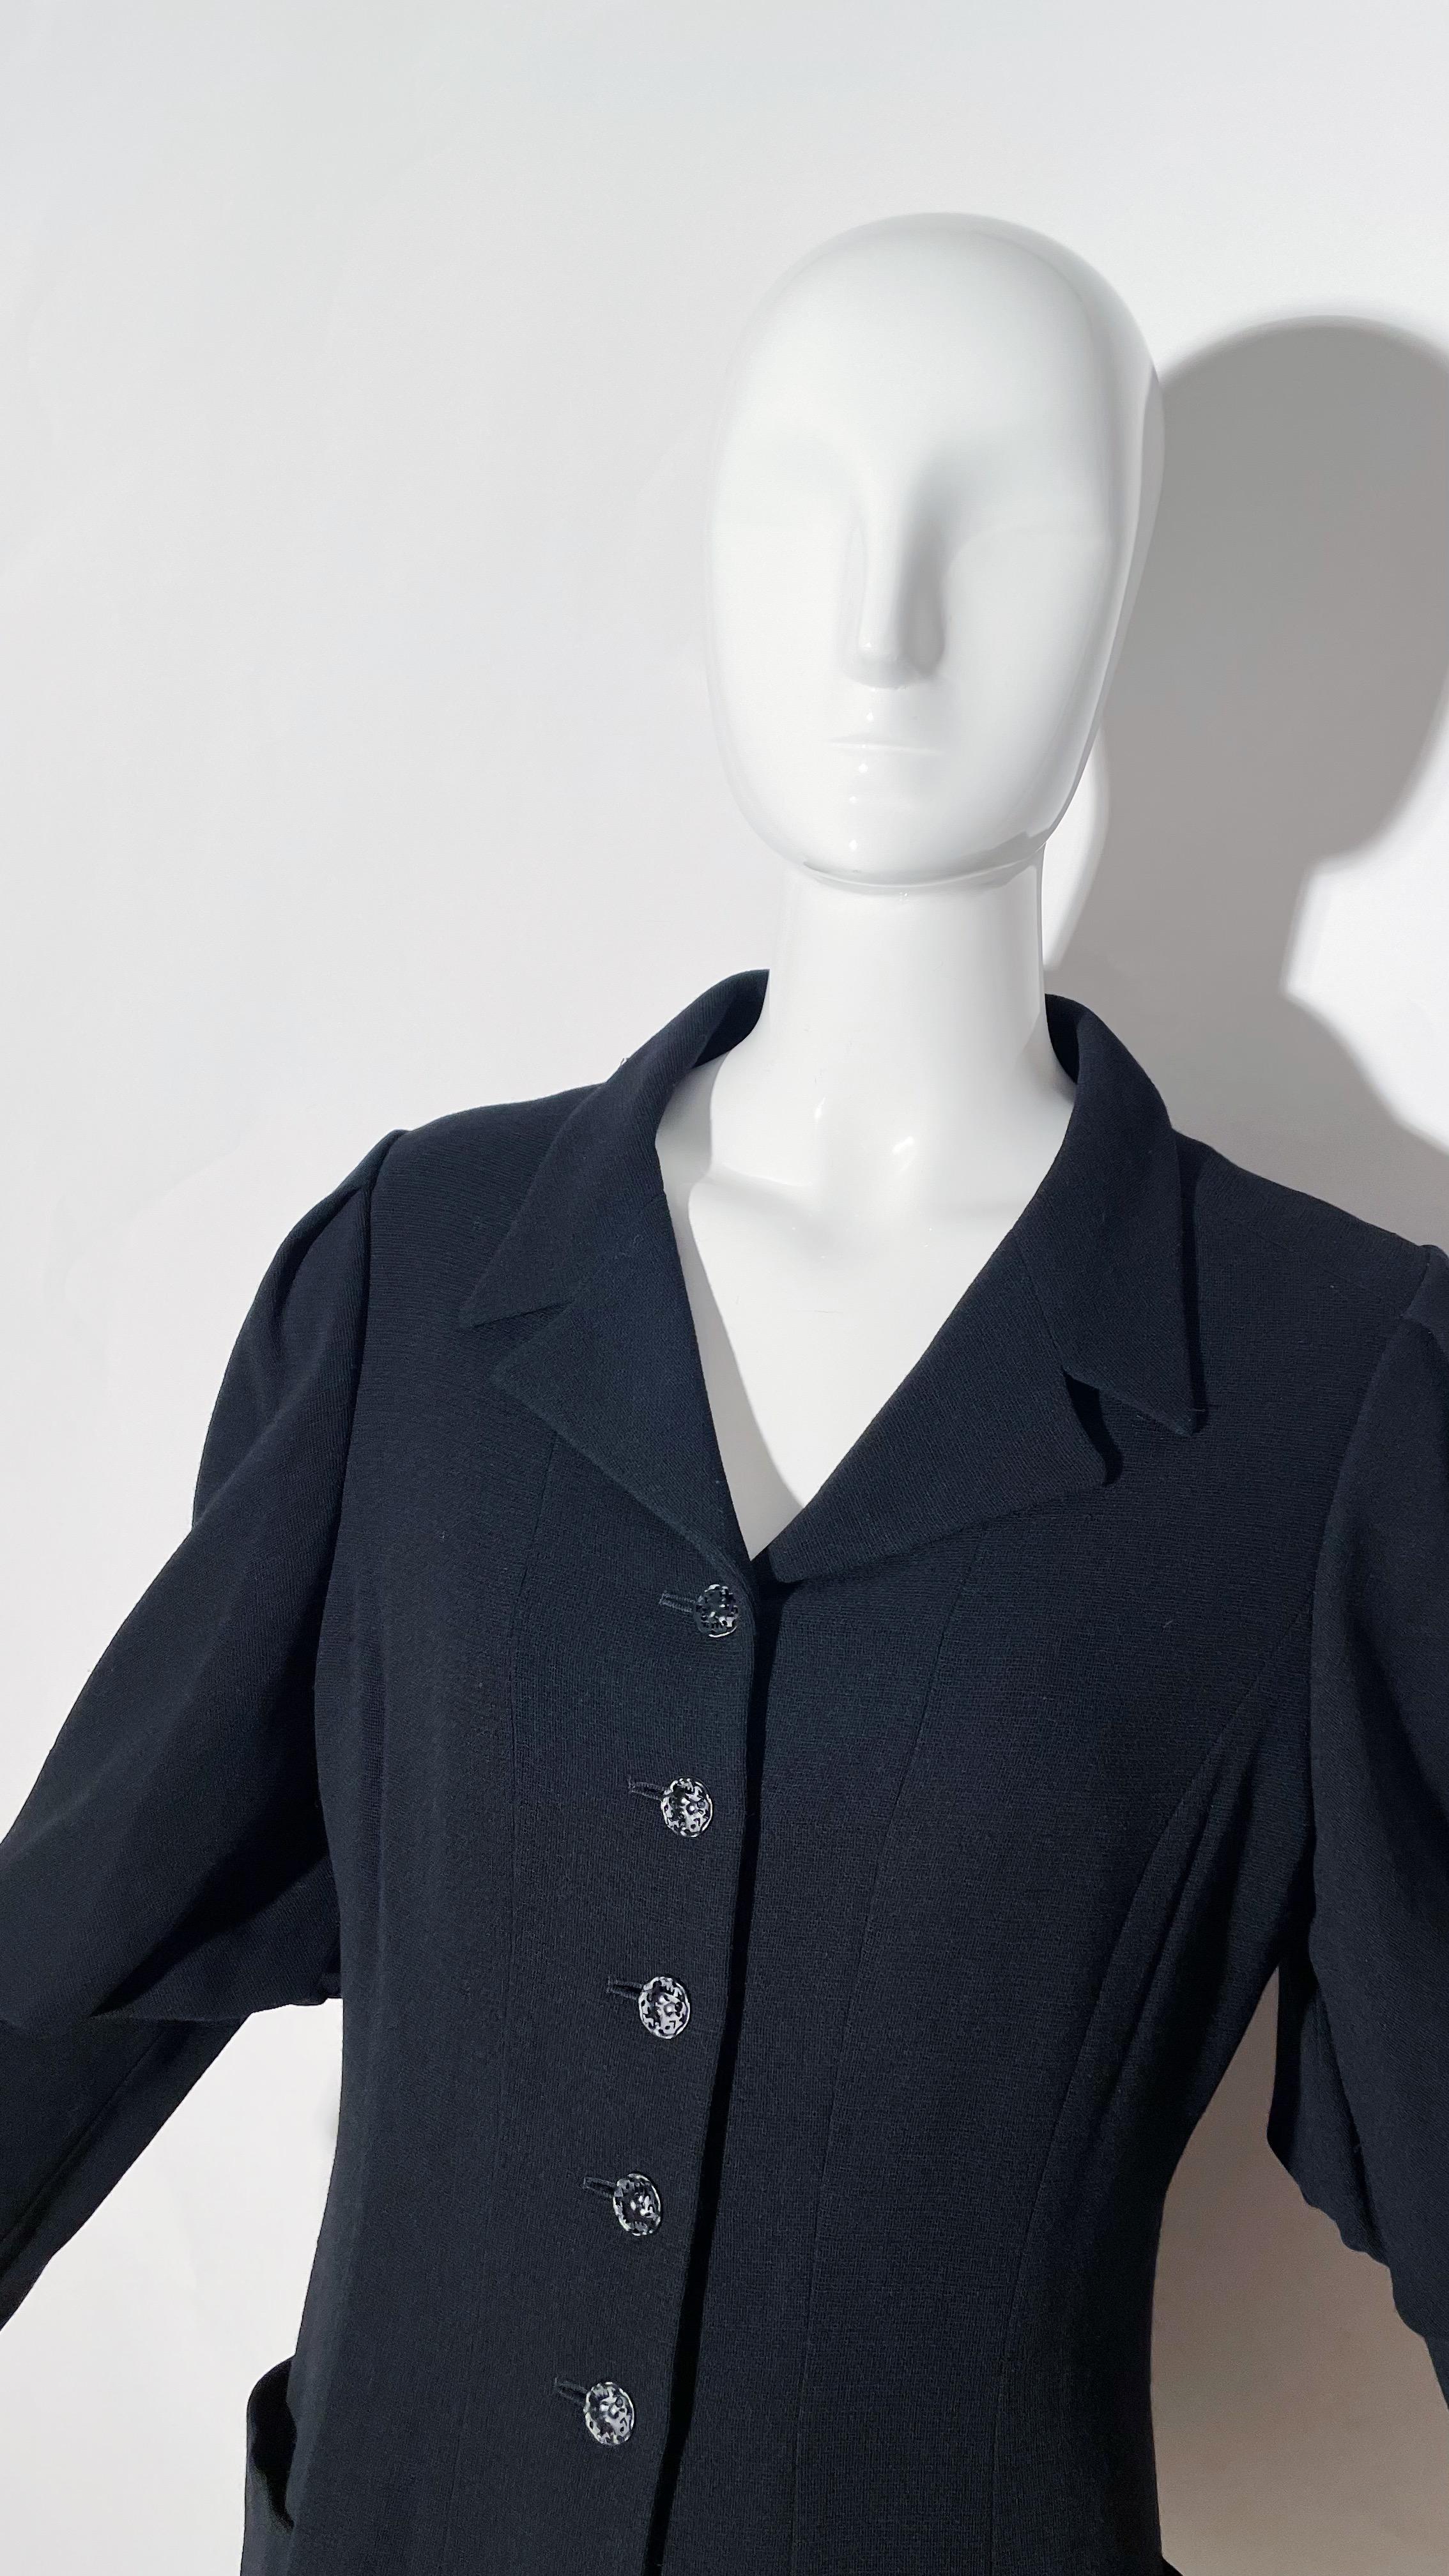 Chloe Black Blazer with Dramatic Sleeves  In Excellent Condition For Sale In Los Angeles, CA